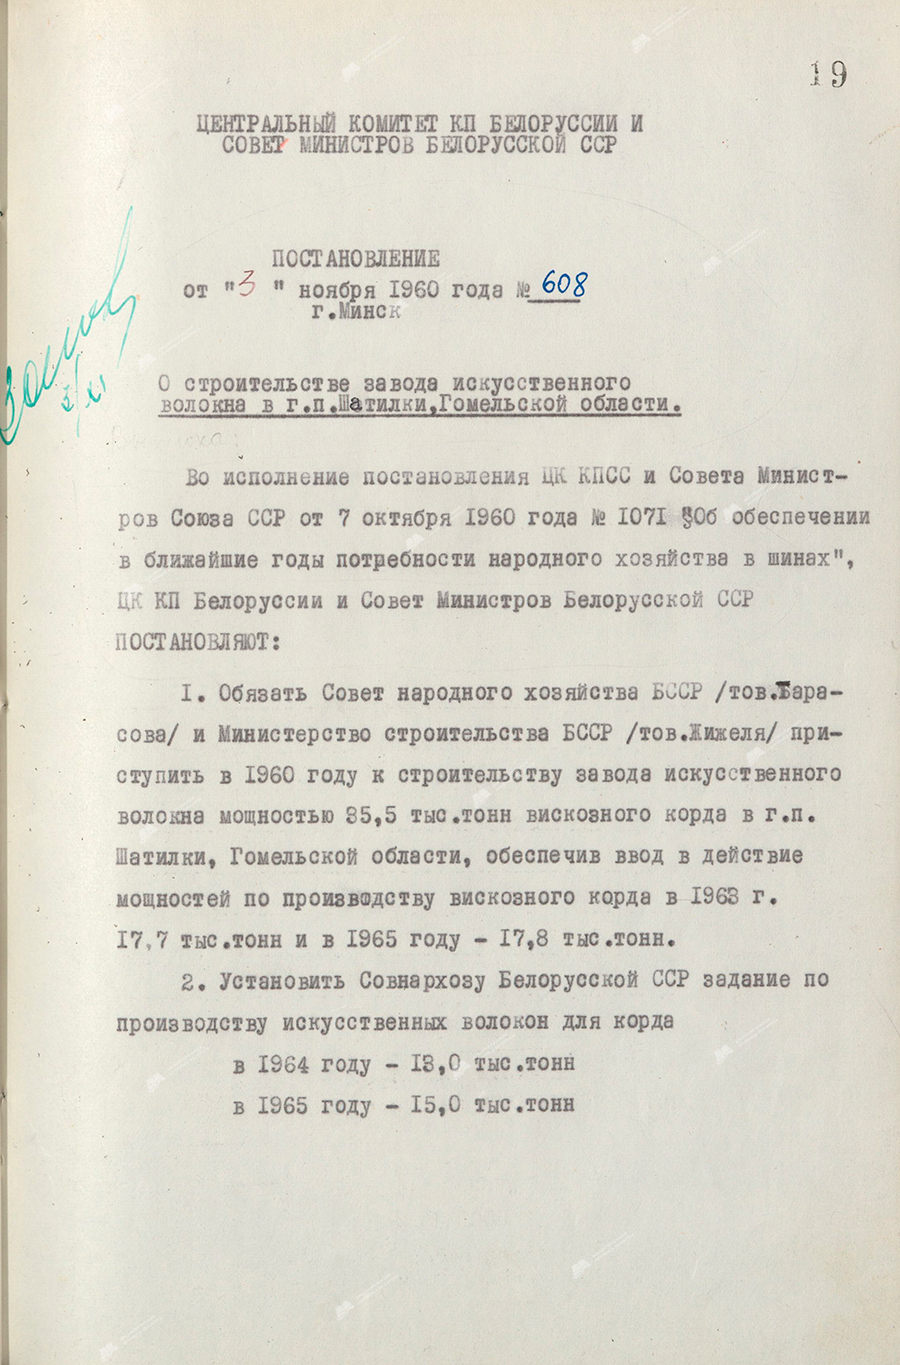 Resolution No. 608 of the Central Committee of the Communist Party of Belarus and the Council of Ministers of the BSSR «On the construction of an artificial fiber plant in the town. Shatilki, Gomel region»-стр. 0